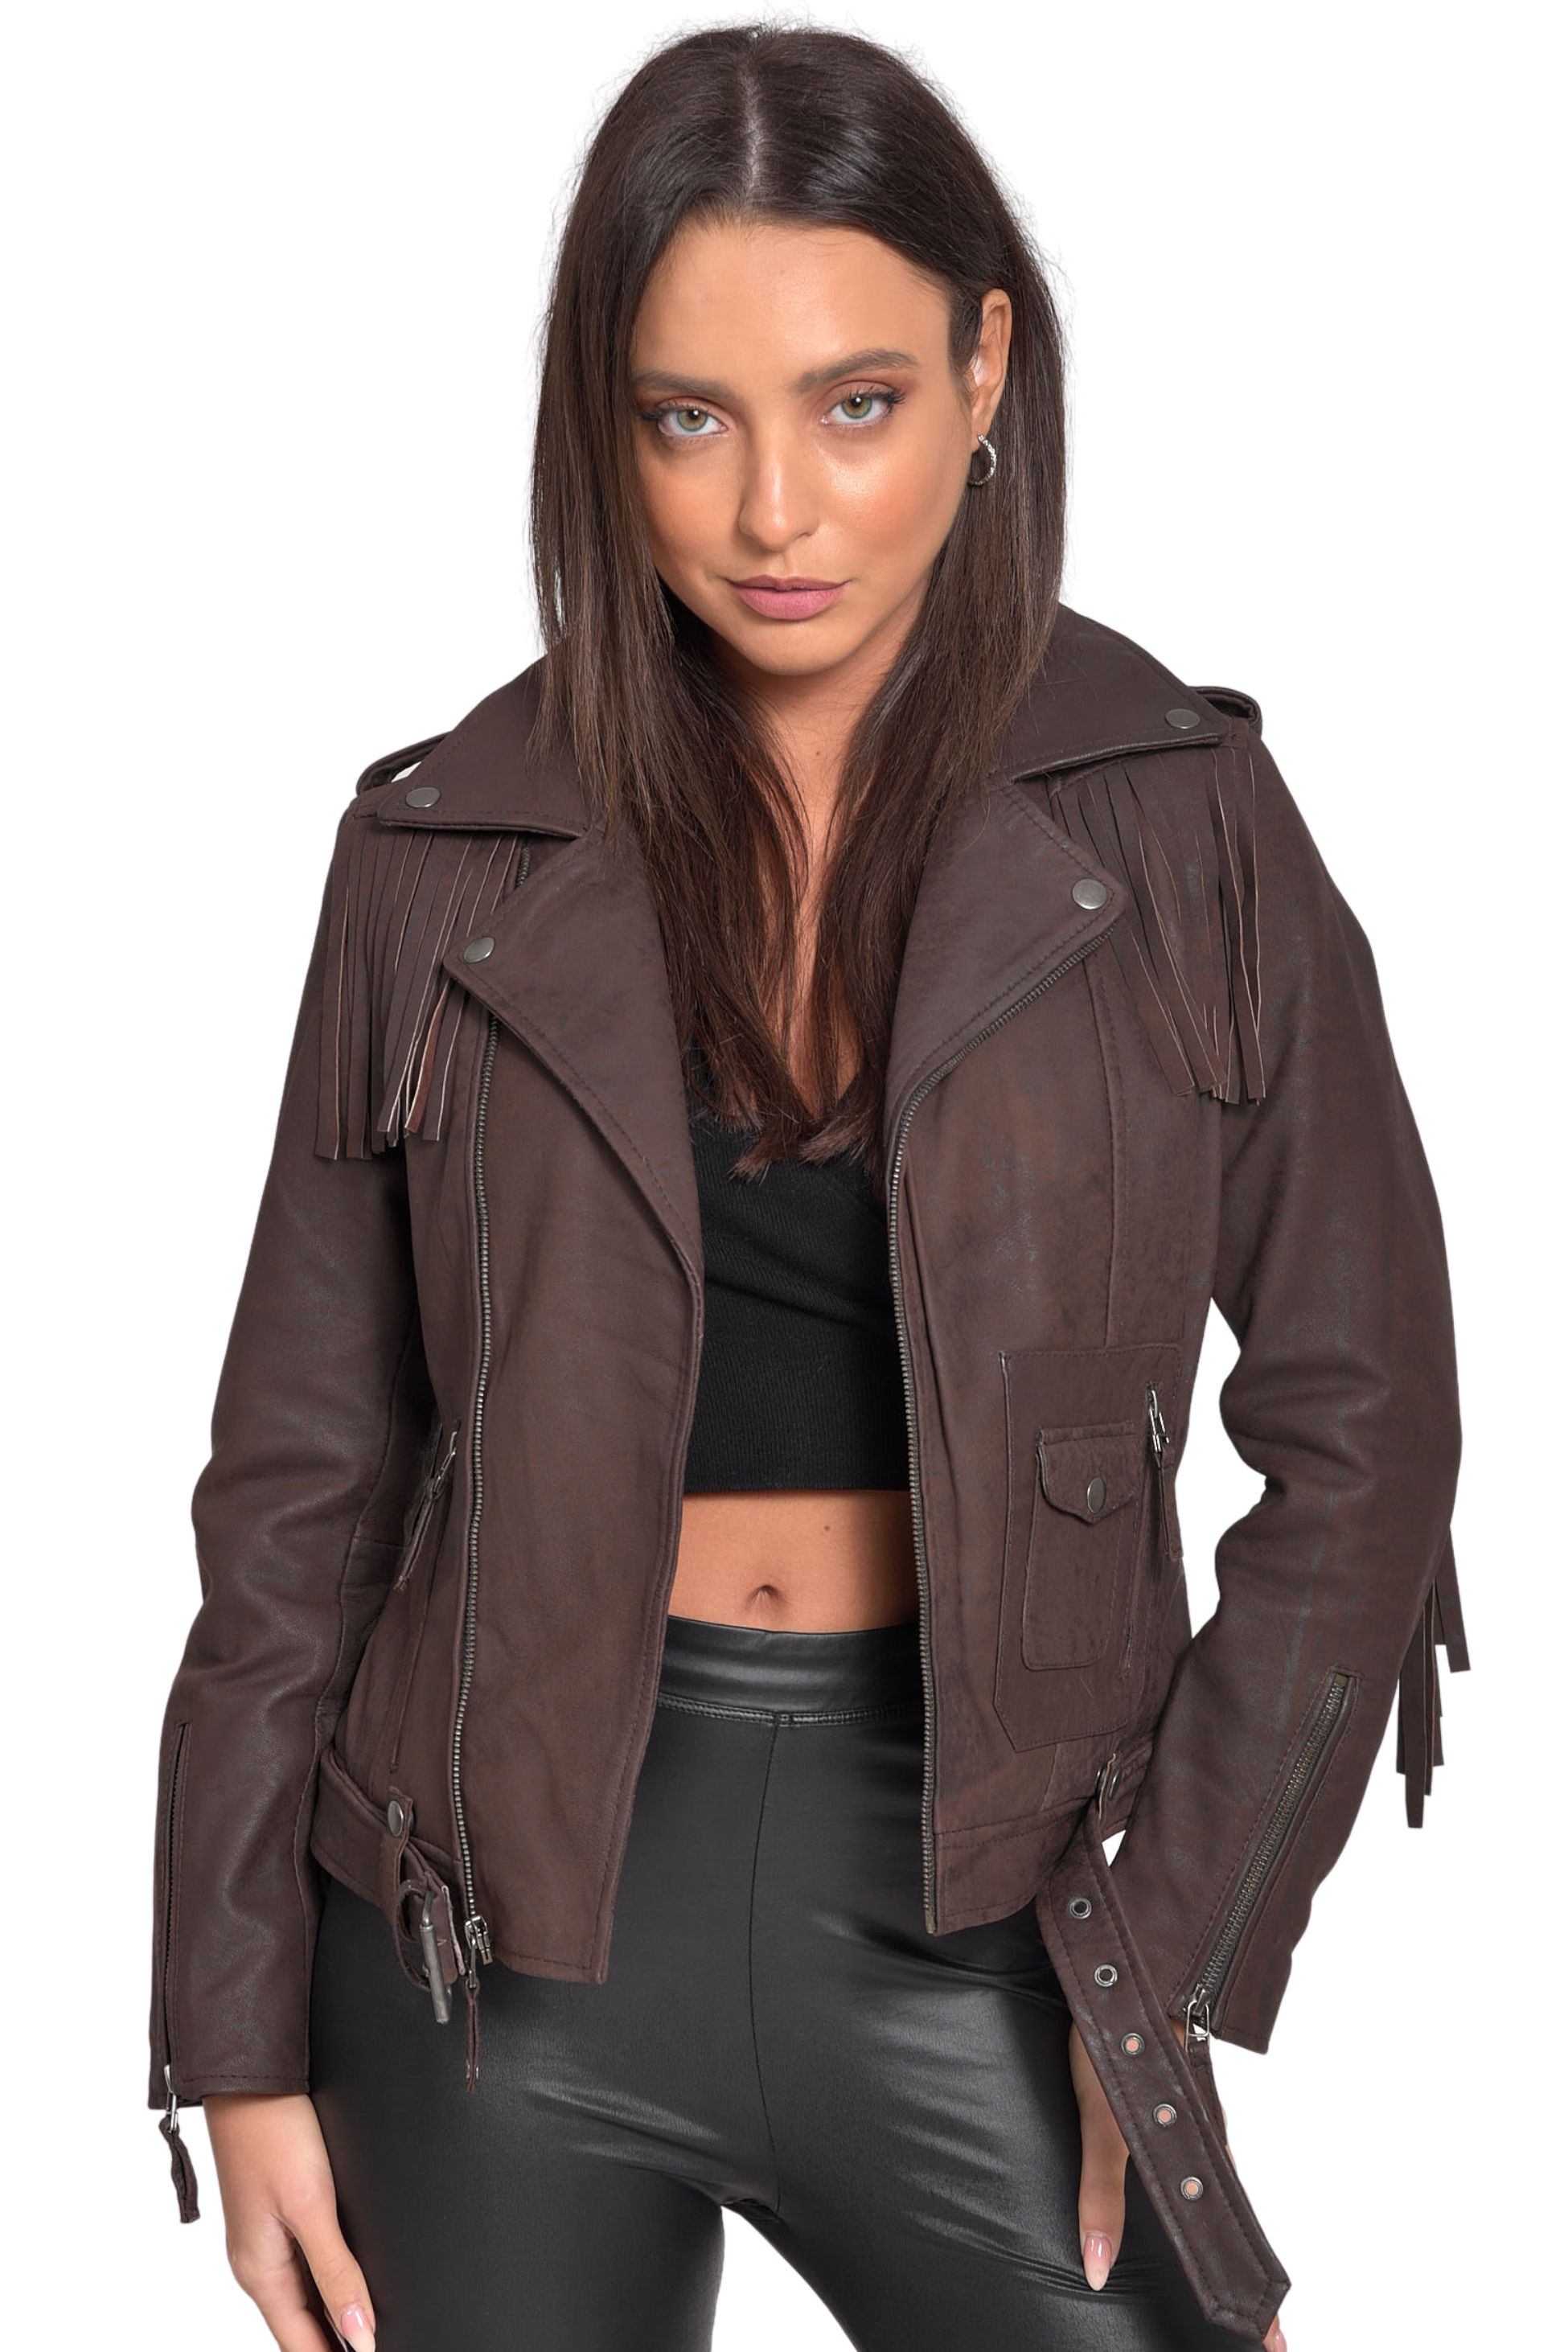 CHEROKEE VINTAGE SHEEP BROWN - AUTHENTIC WOMENS LEATHER JACKET